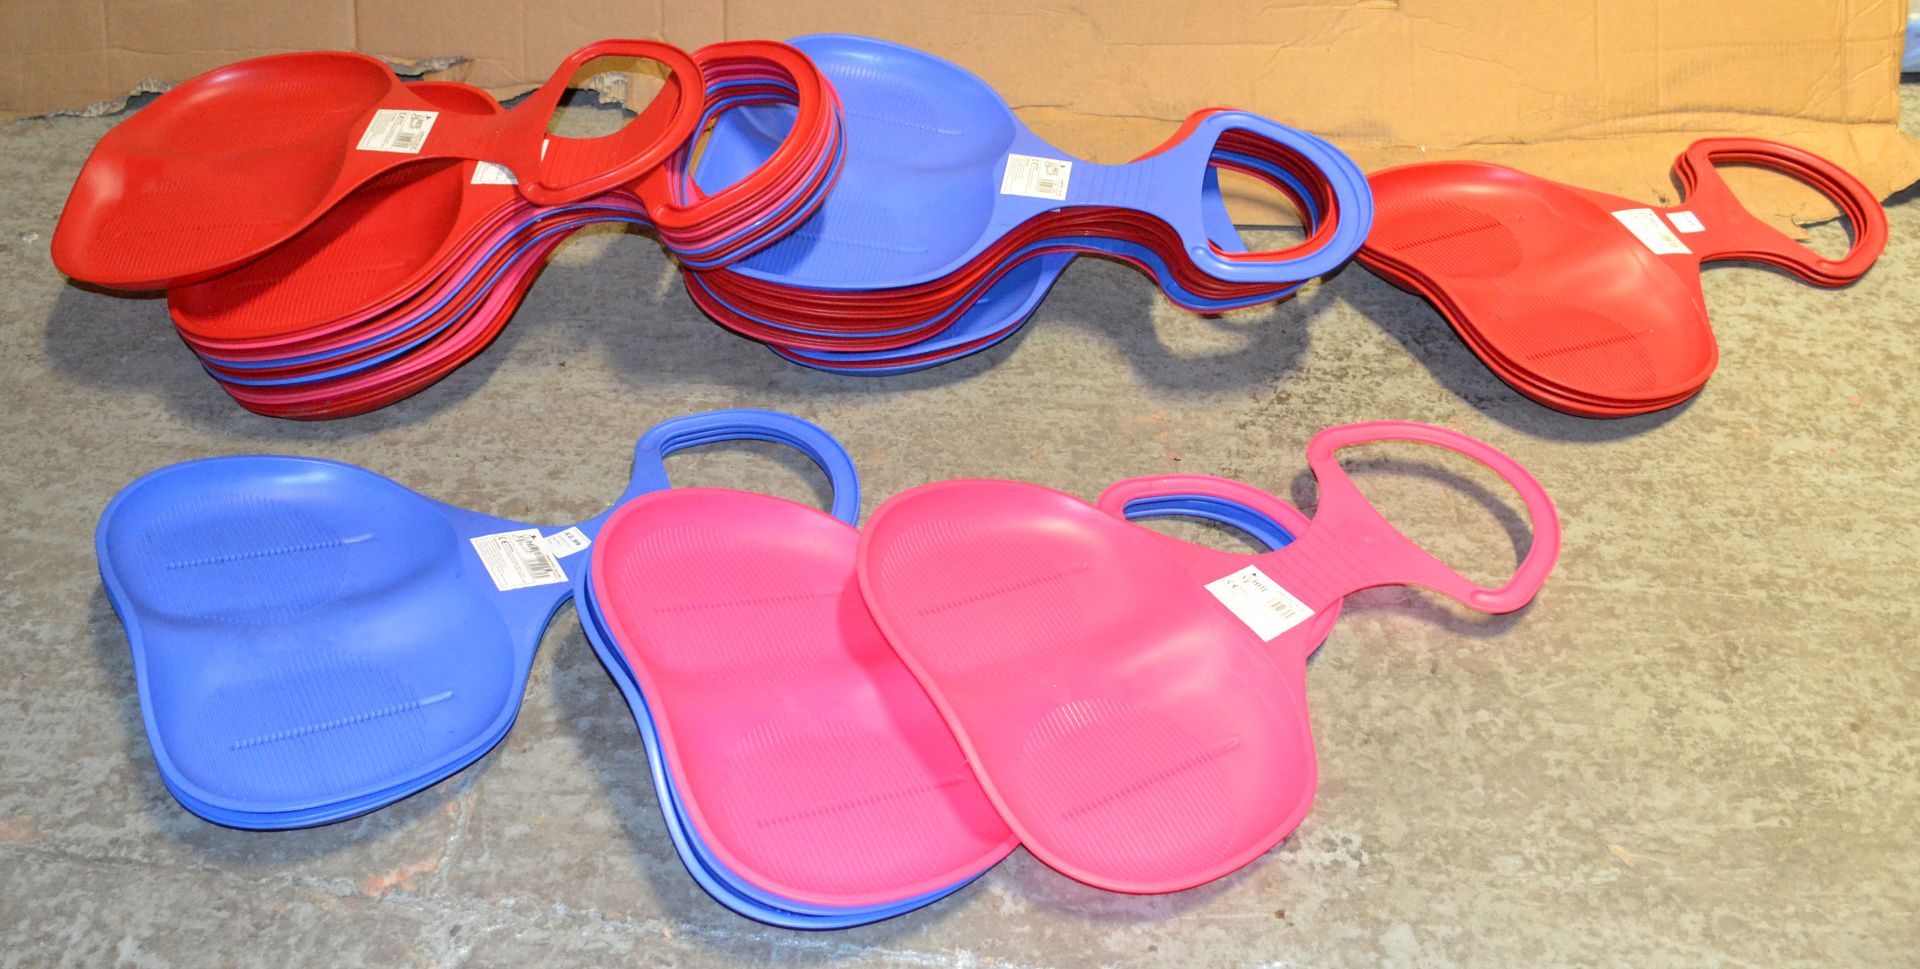 40 x Bum Skid Snow Sledges In Assorted Colours - CL262 - Location: Altrincham WA14 - Image 5 of 5